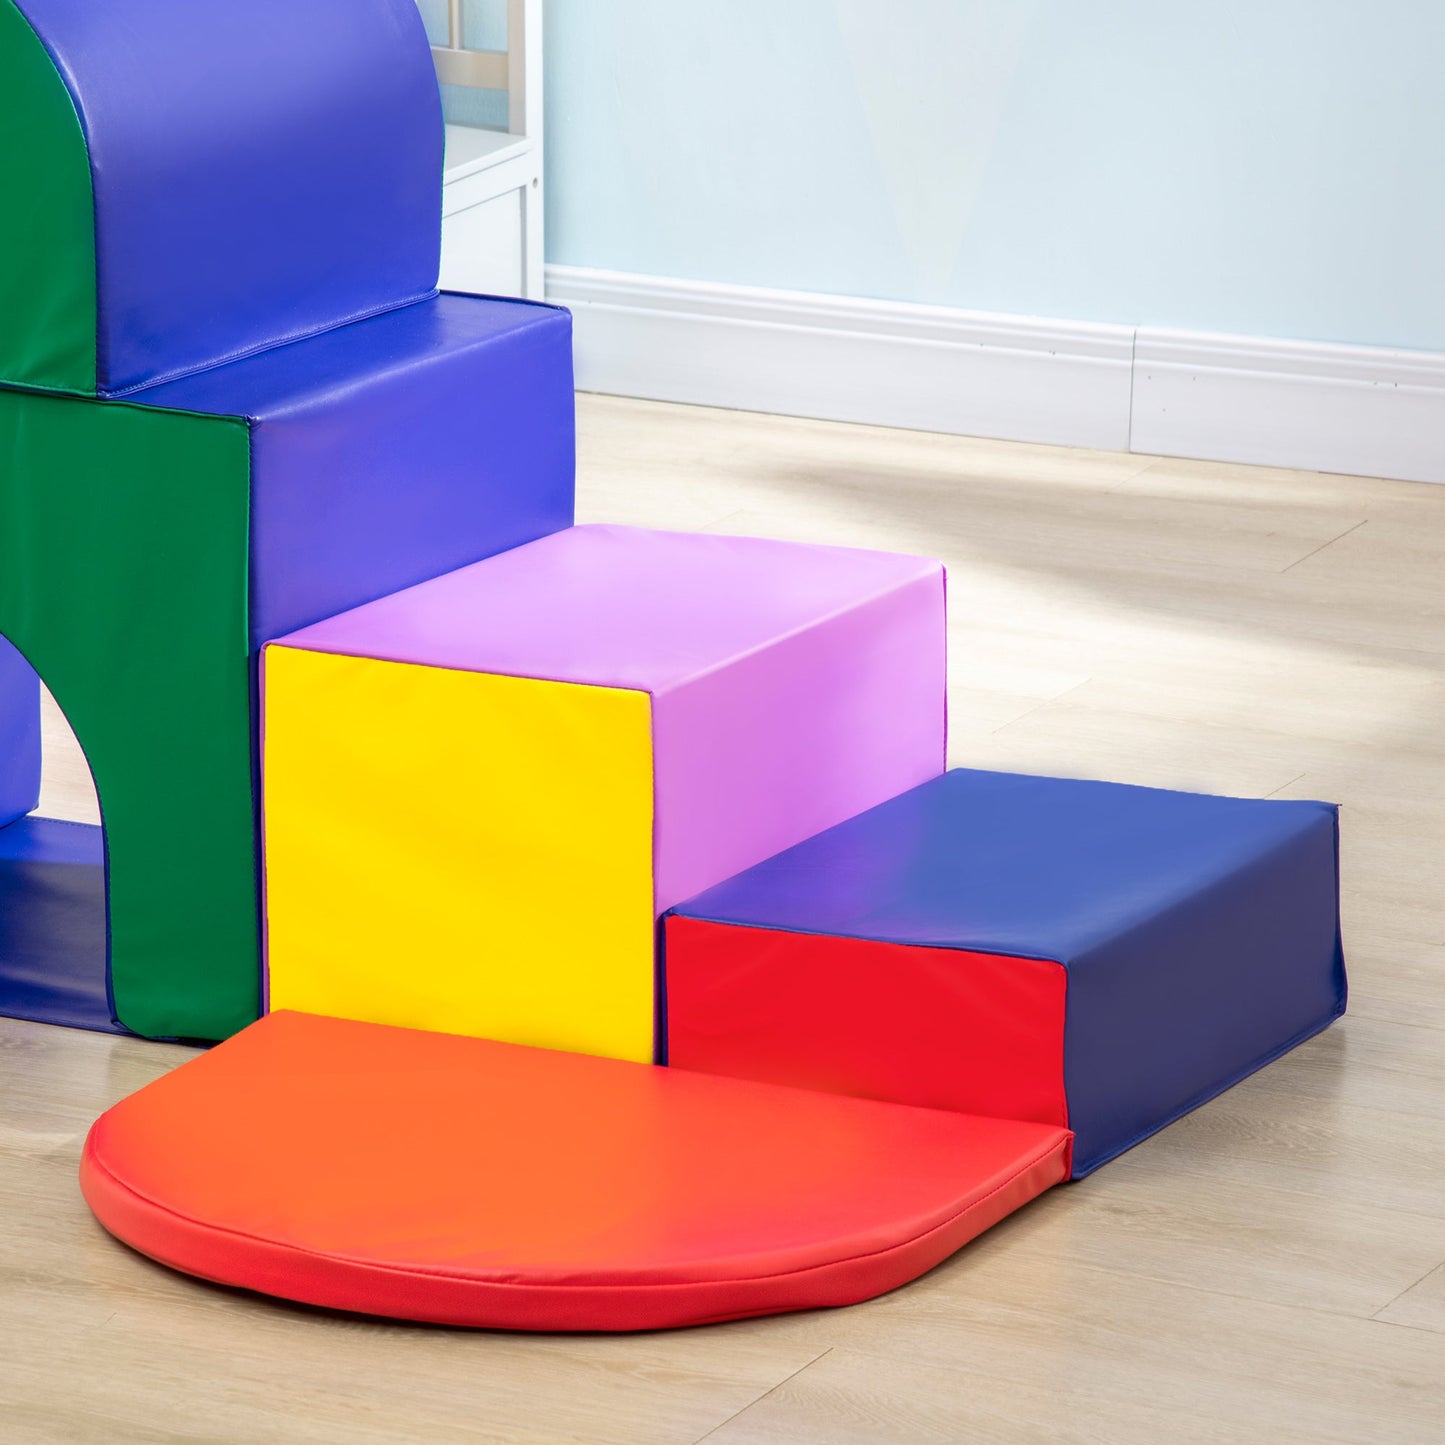 7-piece Soft Play, Foam Play Set, Toddler Stairs and Ramp, Colorful Kids' Educational Software, Activity Toys for Baby Preschooler - Multicolored at Gallery Canada